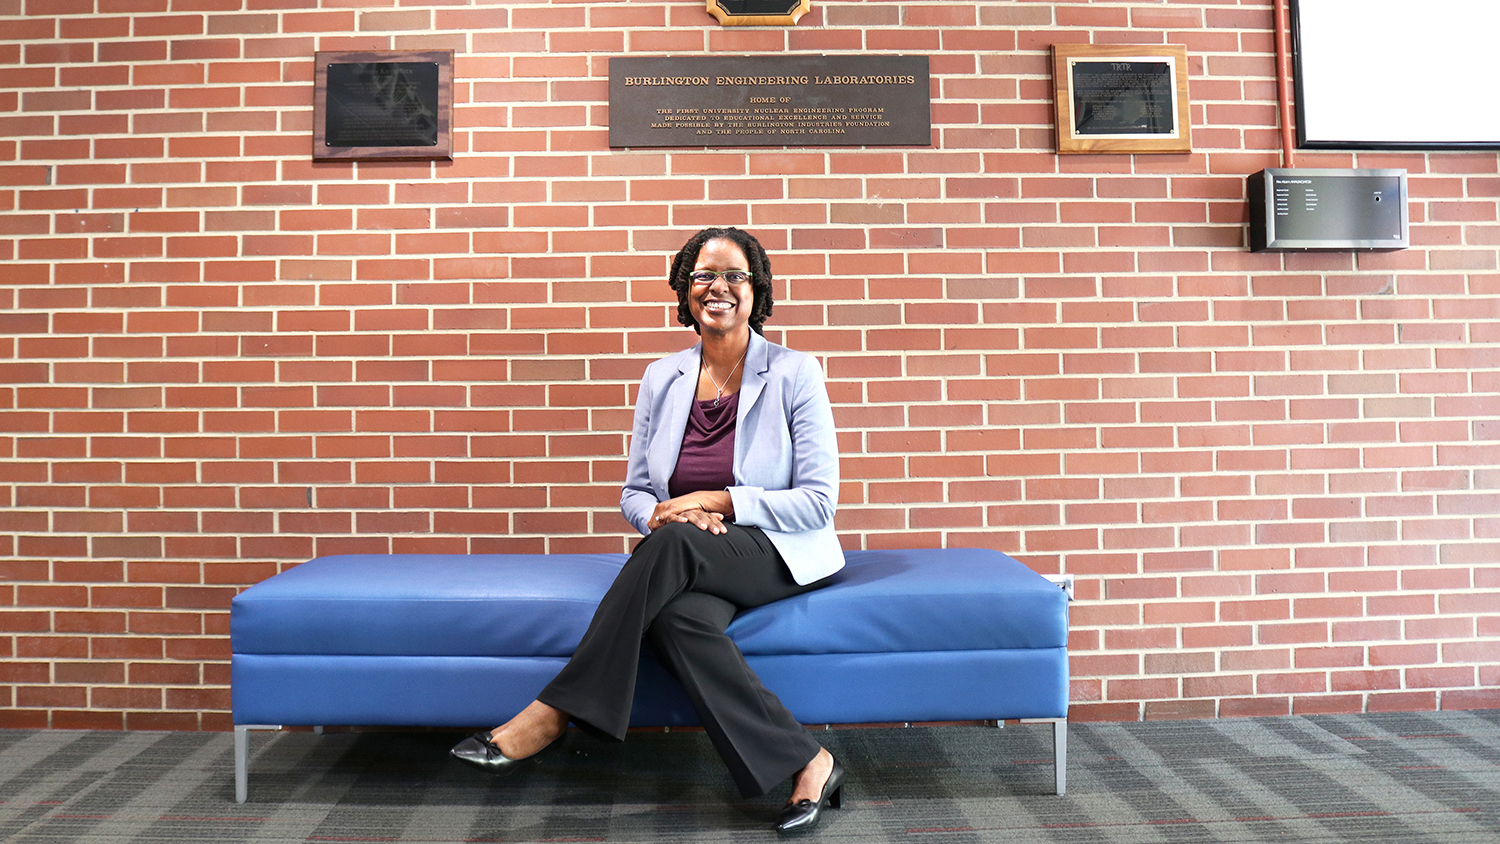 Lisa Marshall sitting on a blue couch in the Burlington Engineering Laboratory lobby.